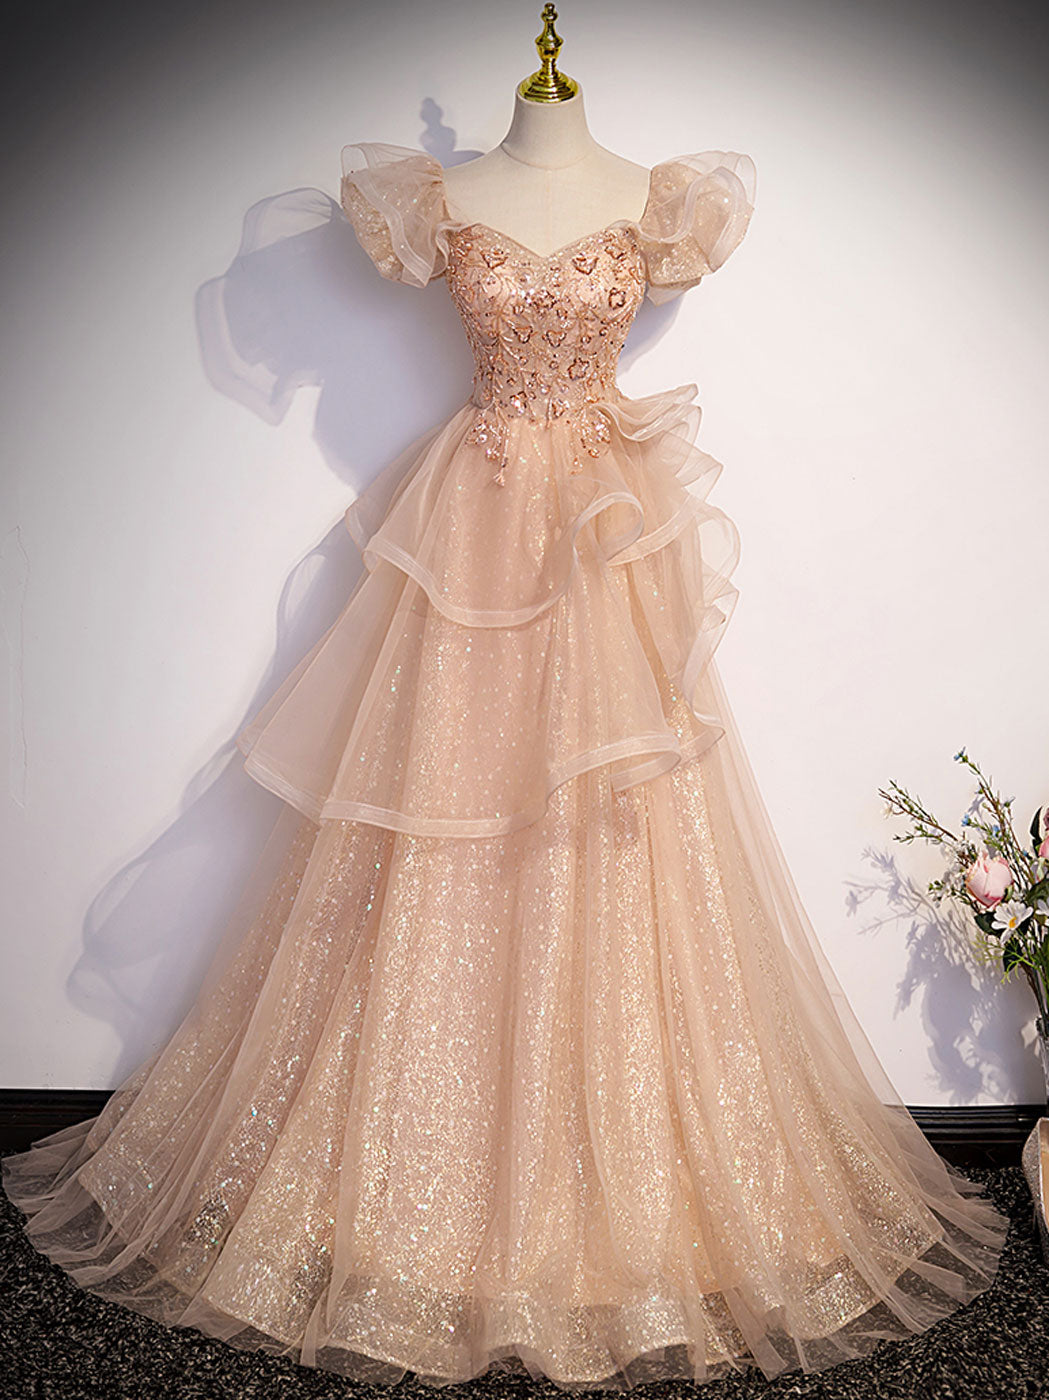 Champagne A-Line Tulle Beading Long Prom Dress Outfits For Girls, Champagne Formal Dresses